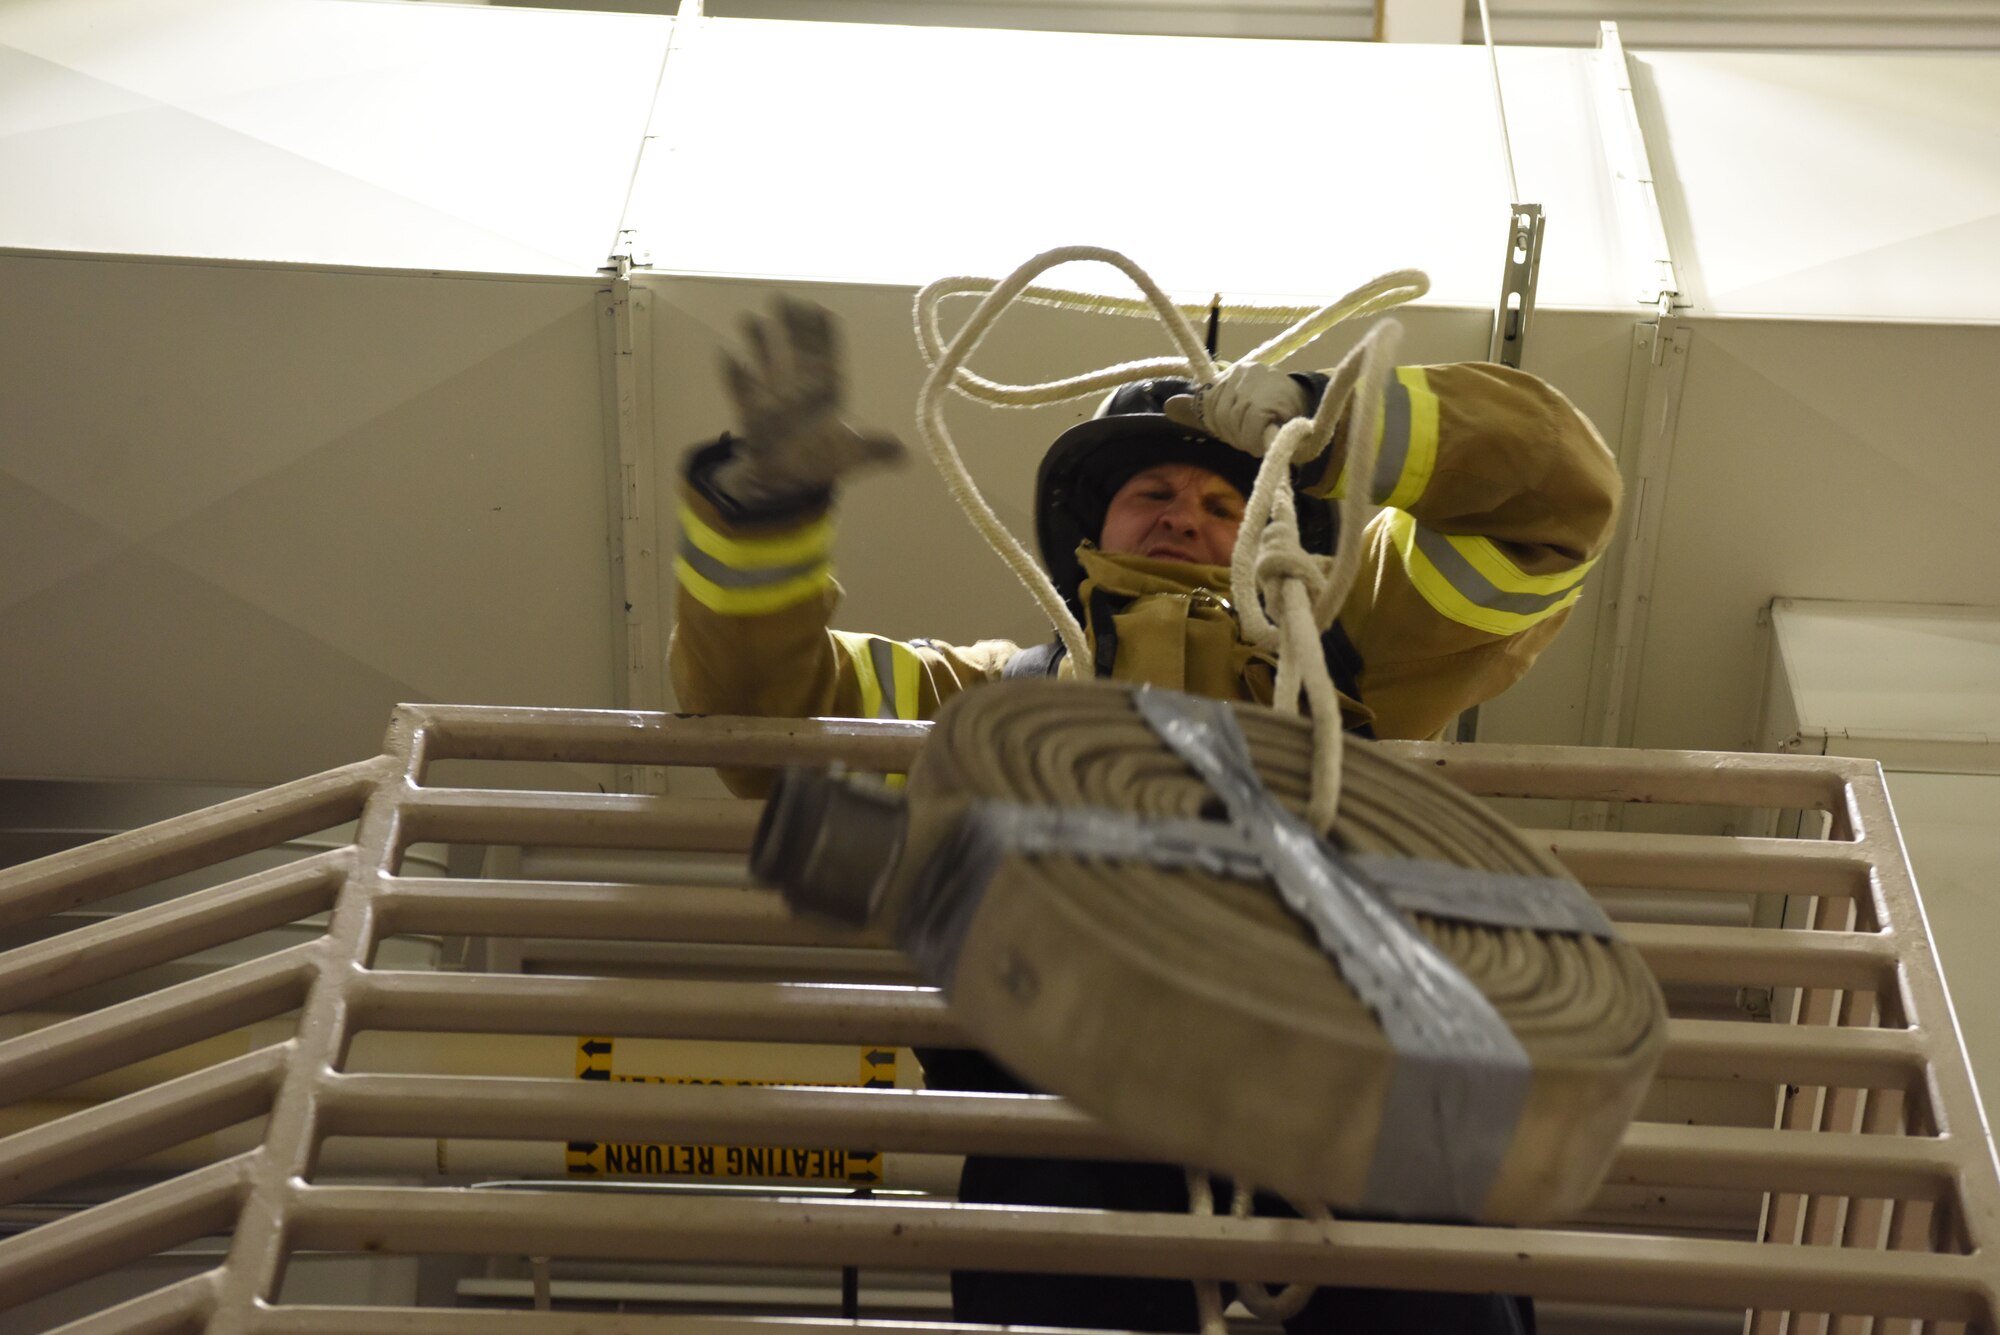 Senior Master Sgt. Joshua Beutler, the 28th Aircraft Maintenance Squadron first sergeant, pulls a rope with an attached hose over a stair railing at Ellsworth Air Force Base, S.D., Oct. 5, 2018. Several squadrons on base formed teams to compete in the Firefighter Challenge, one of the many events hosted by the 28th Civil Engineer Squadron fire protection flight during National Fire Prevention and Safety Week. (U.S. Air Force photo by Airman 1st Class Thomas Karol)